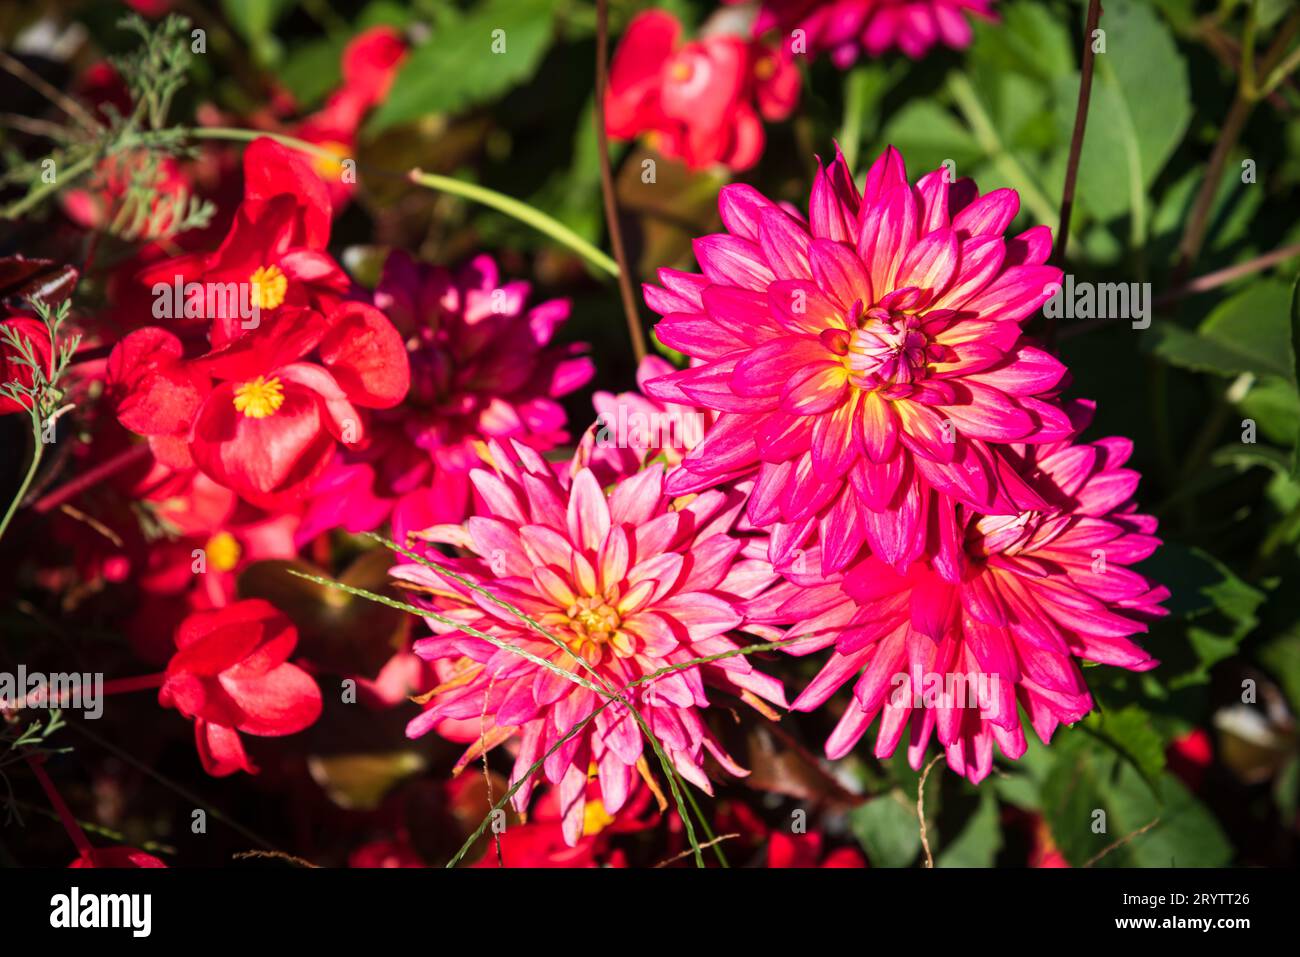 Autumn flowers. Red yellow dahlia flowers and mask flowers at background in the garden. Seasonal gardening background. Natural positive beauty concept Stock Photo